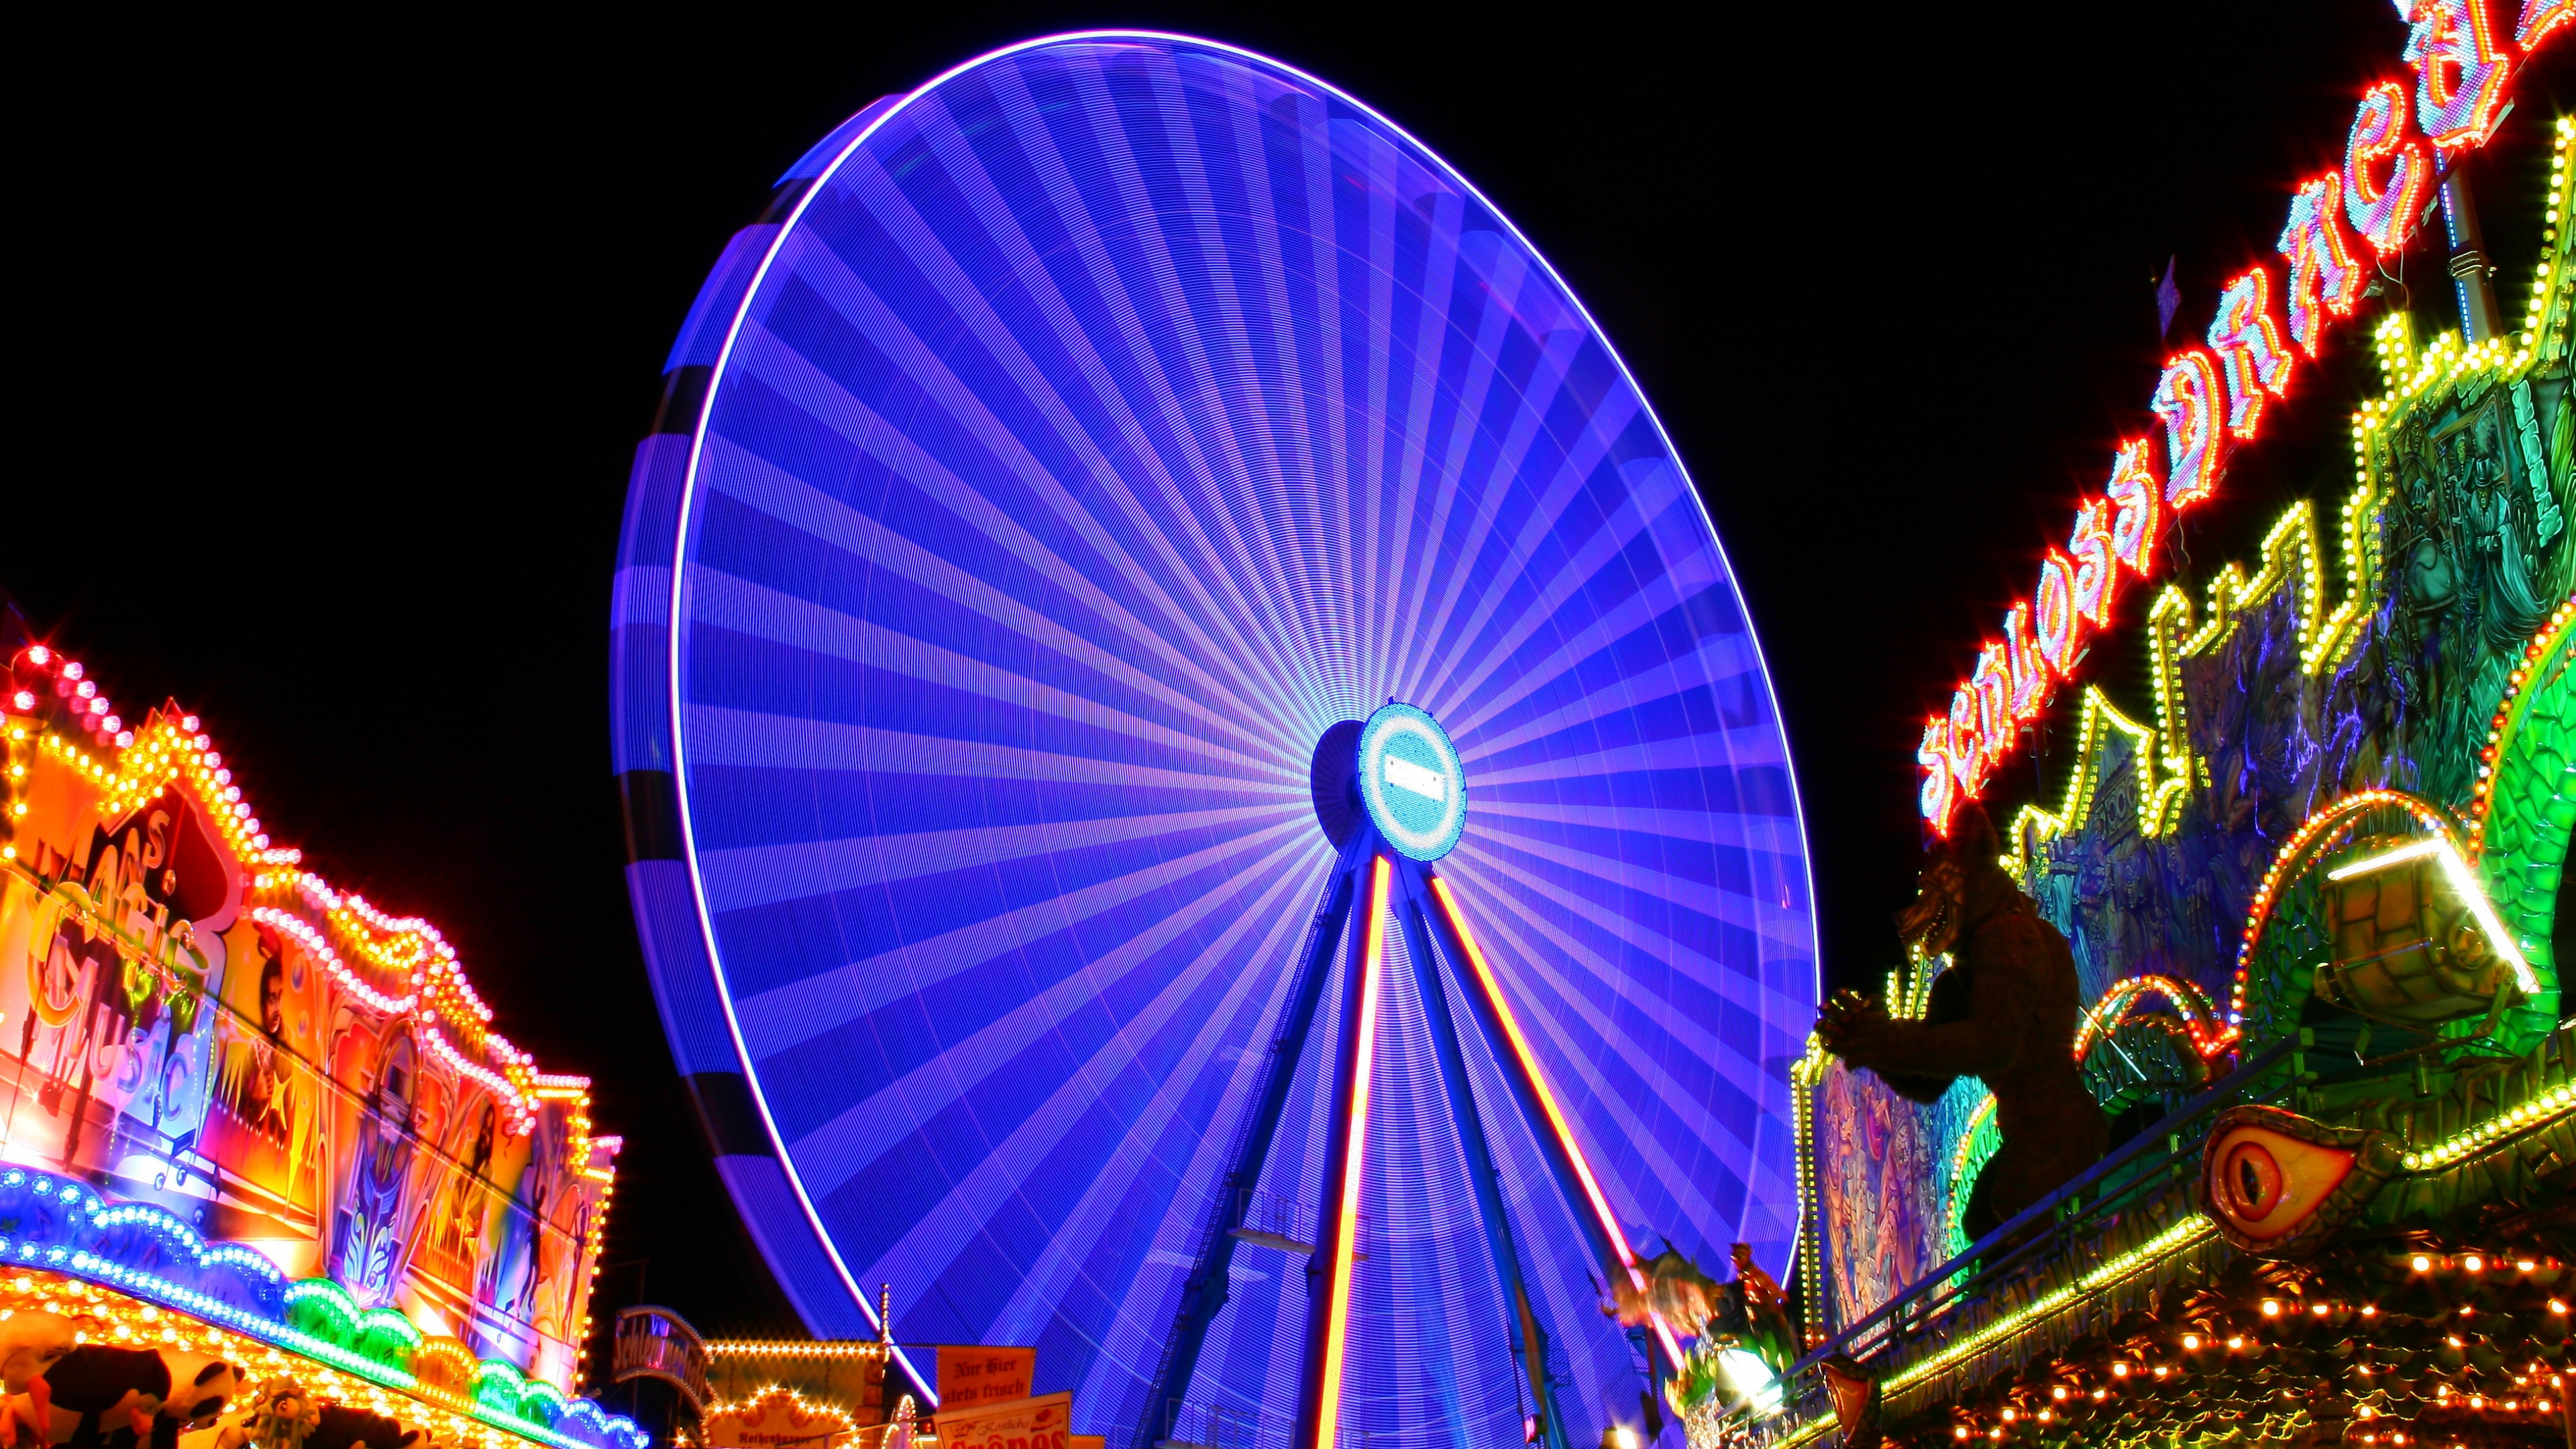 Blue and Red Ferris Wheel During Night Time. Wallpaper in 3840x2160 Resolution